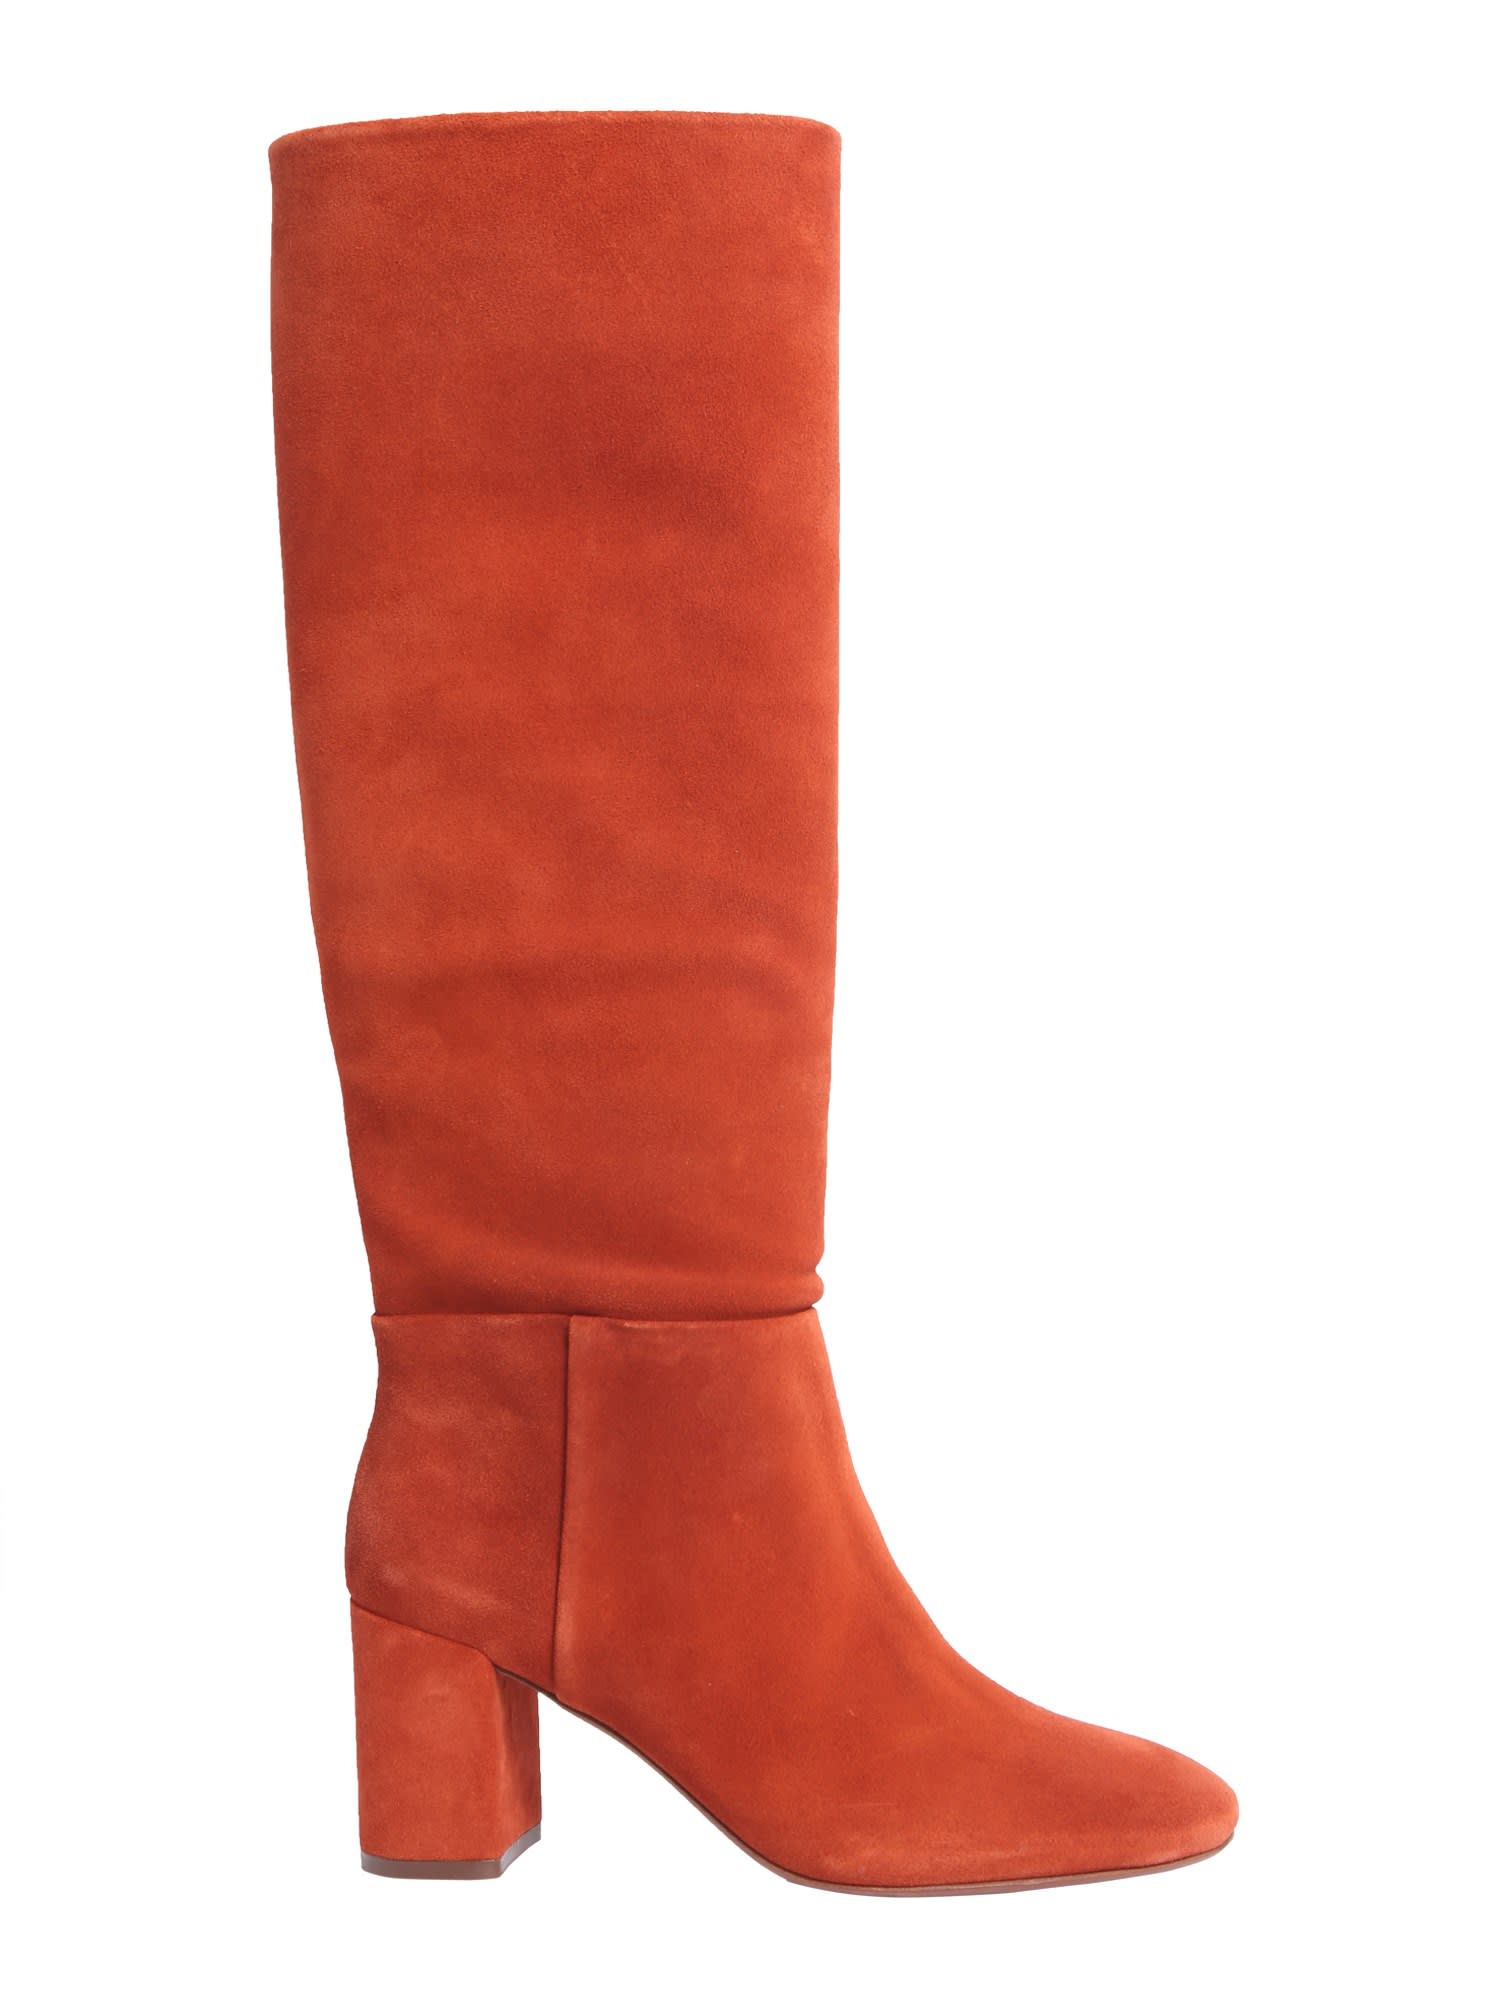 Buy Tory Burch Brooke Slouchy Boots online, shop Tory Burch shoes with free shipping